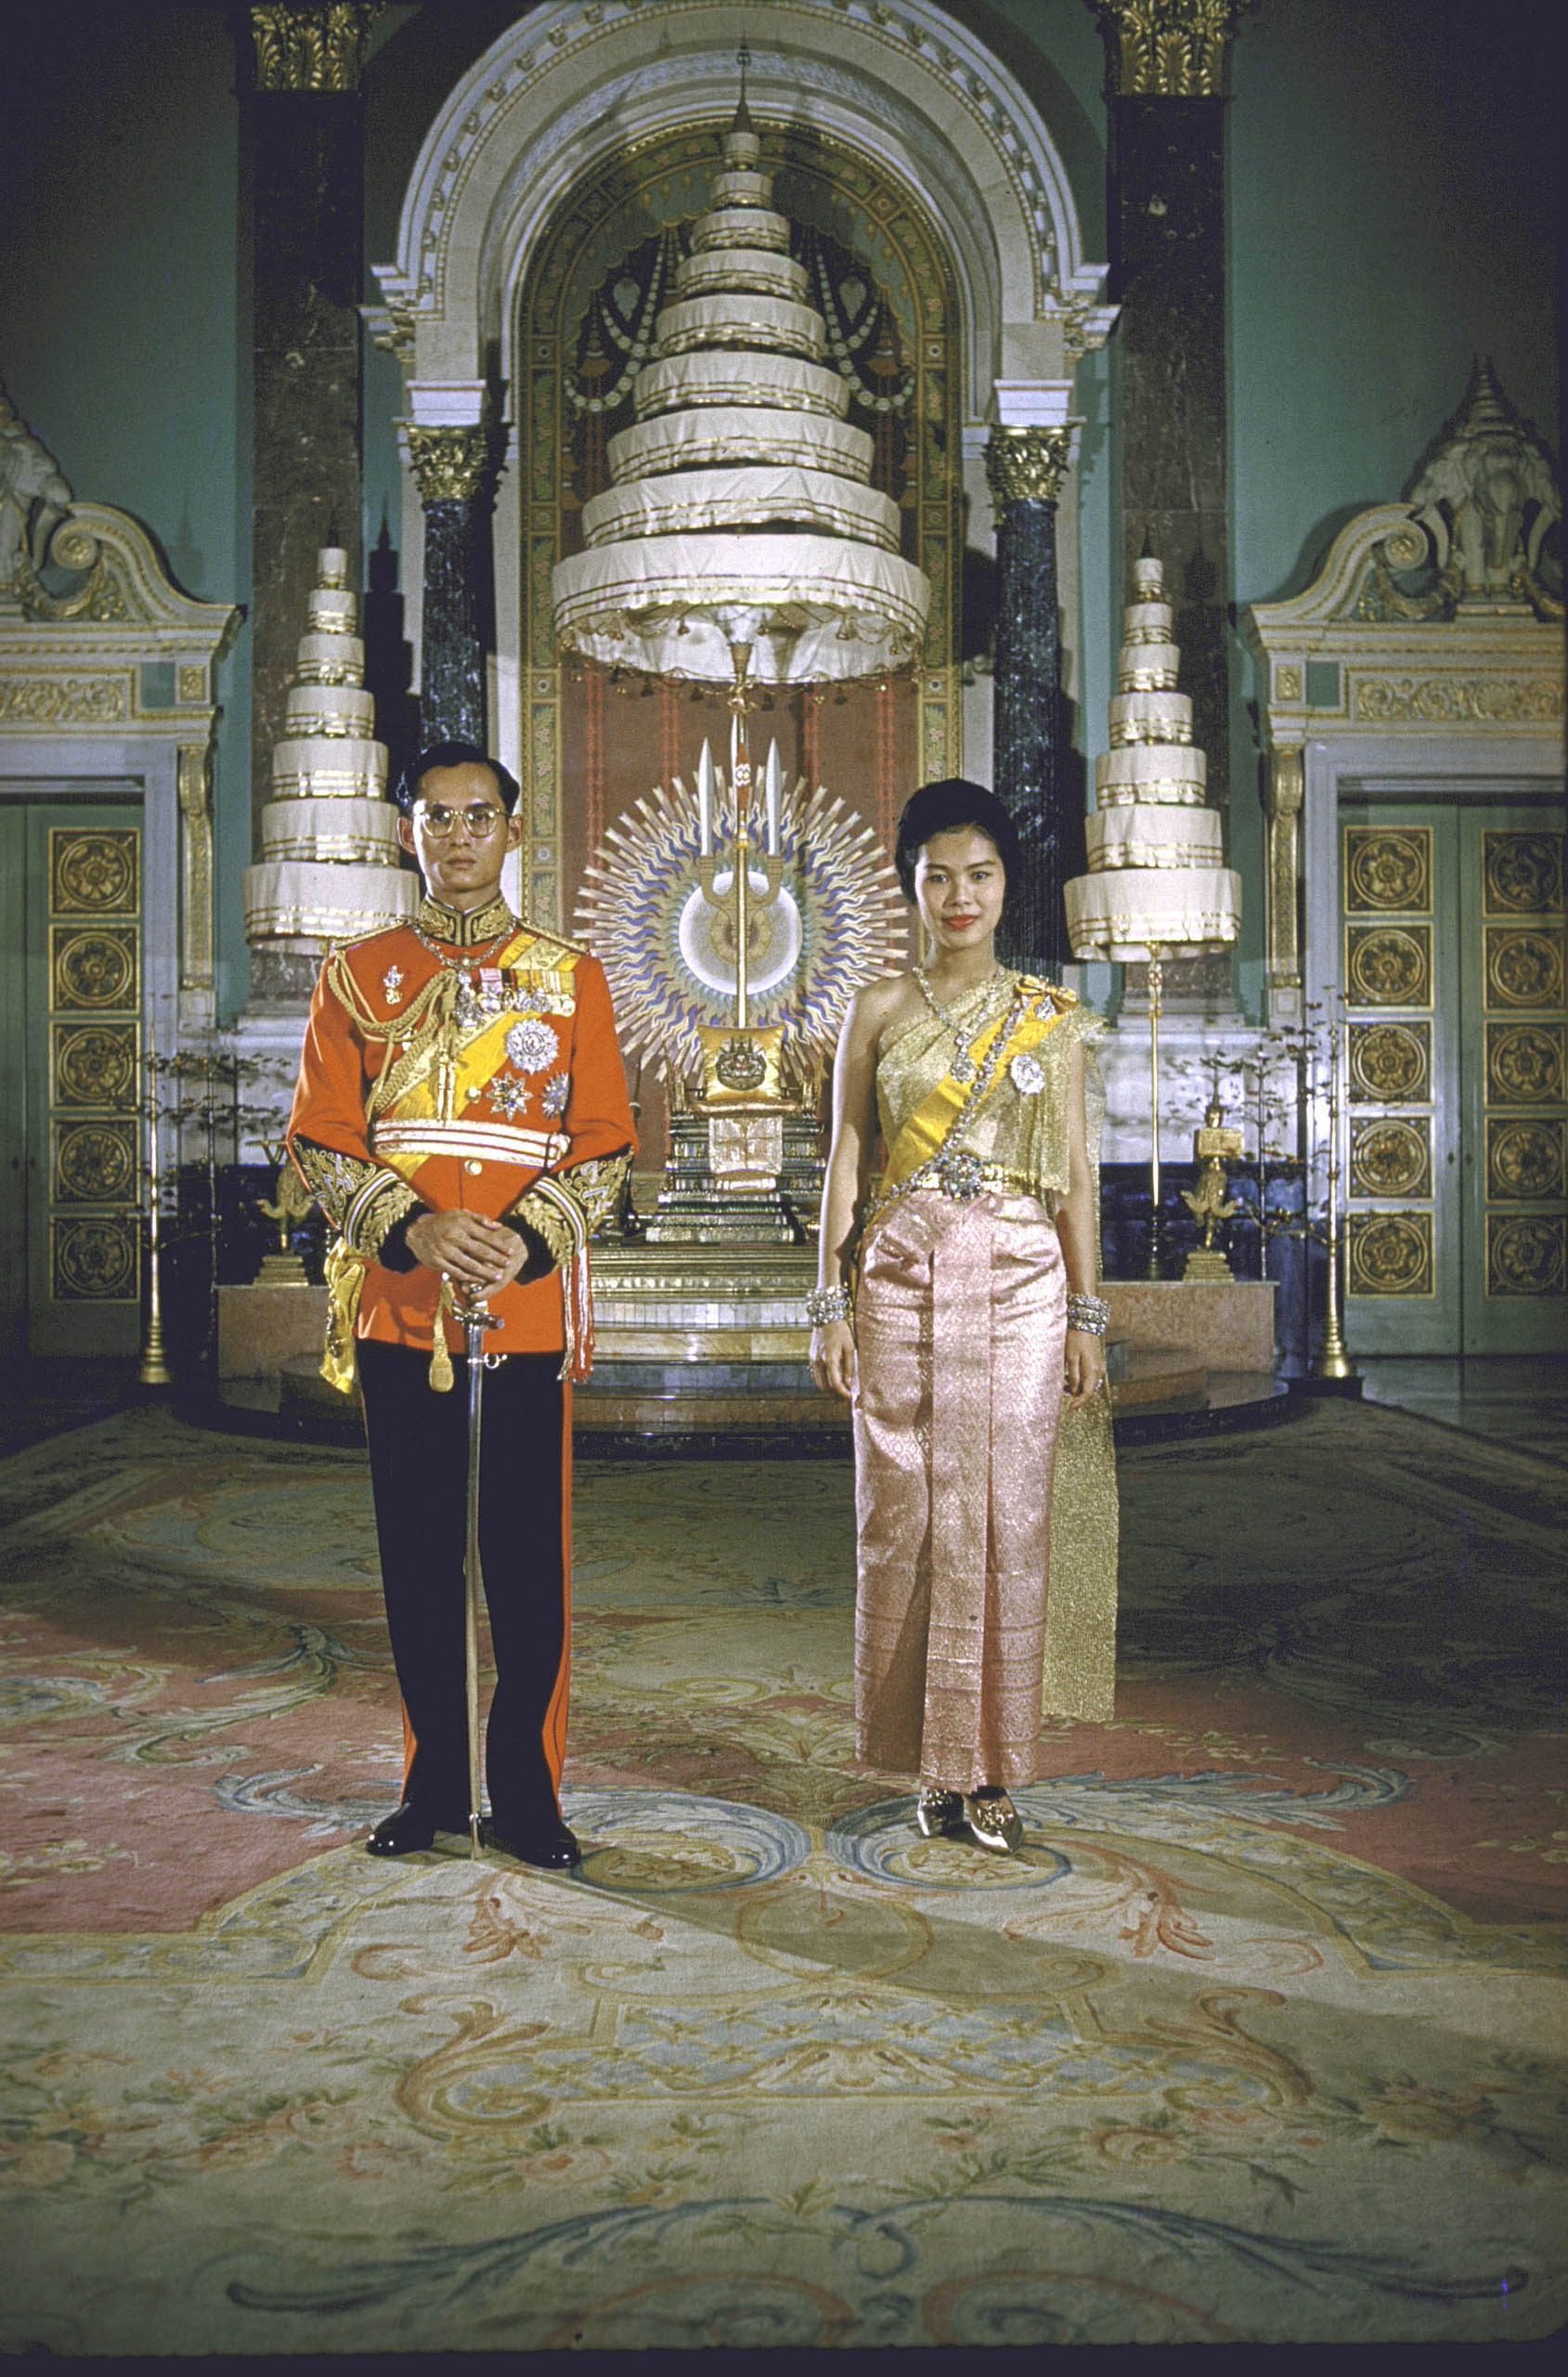 Formal portrait of King Bhumibol Adulyadej and Queen Sirikit at the Palace in 1960. The nine-tiered parasol in the background is a symbol of the Chakri Dynasty.